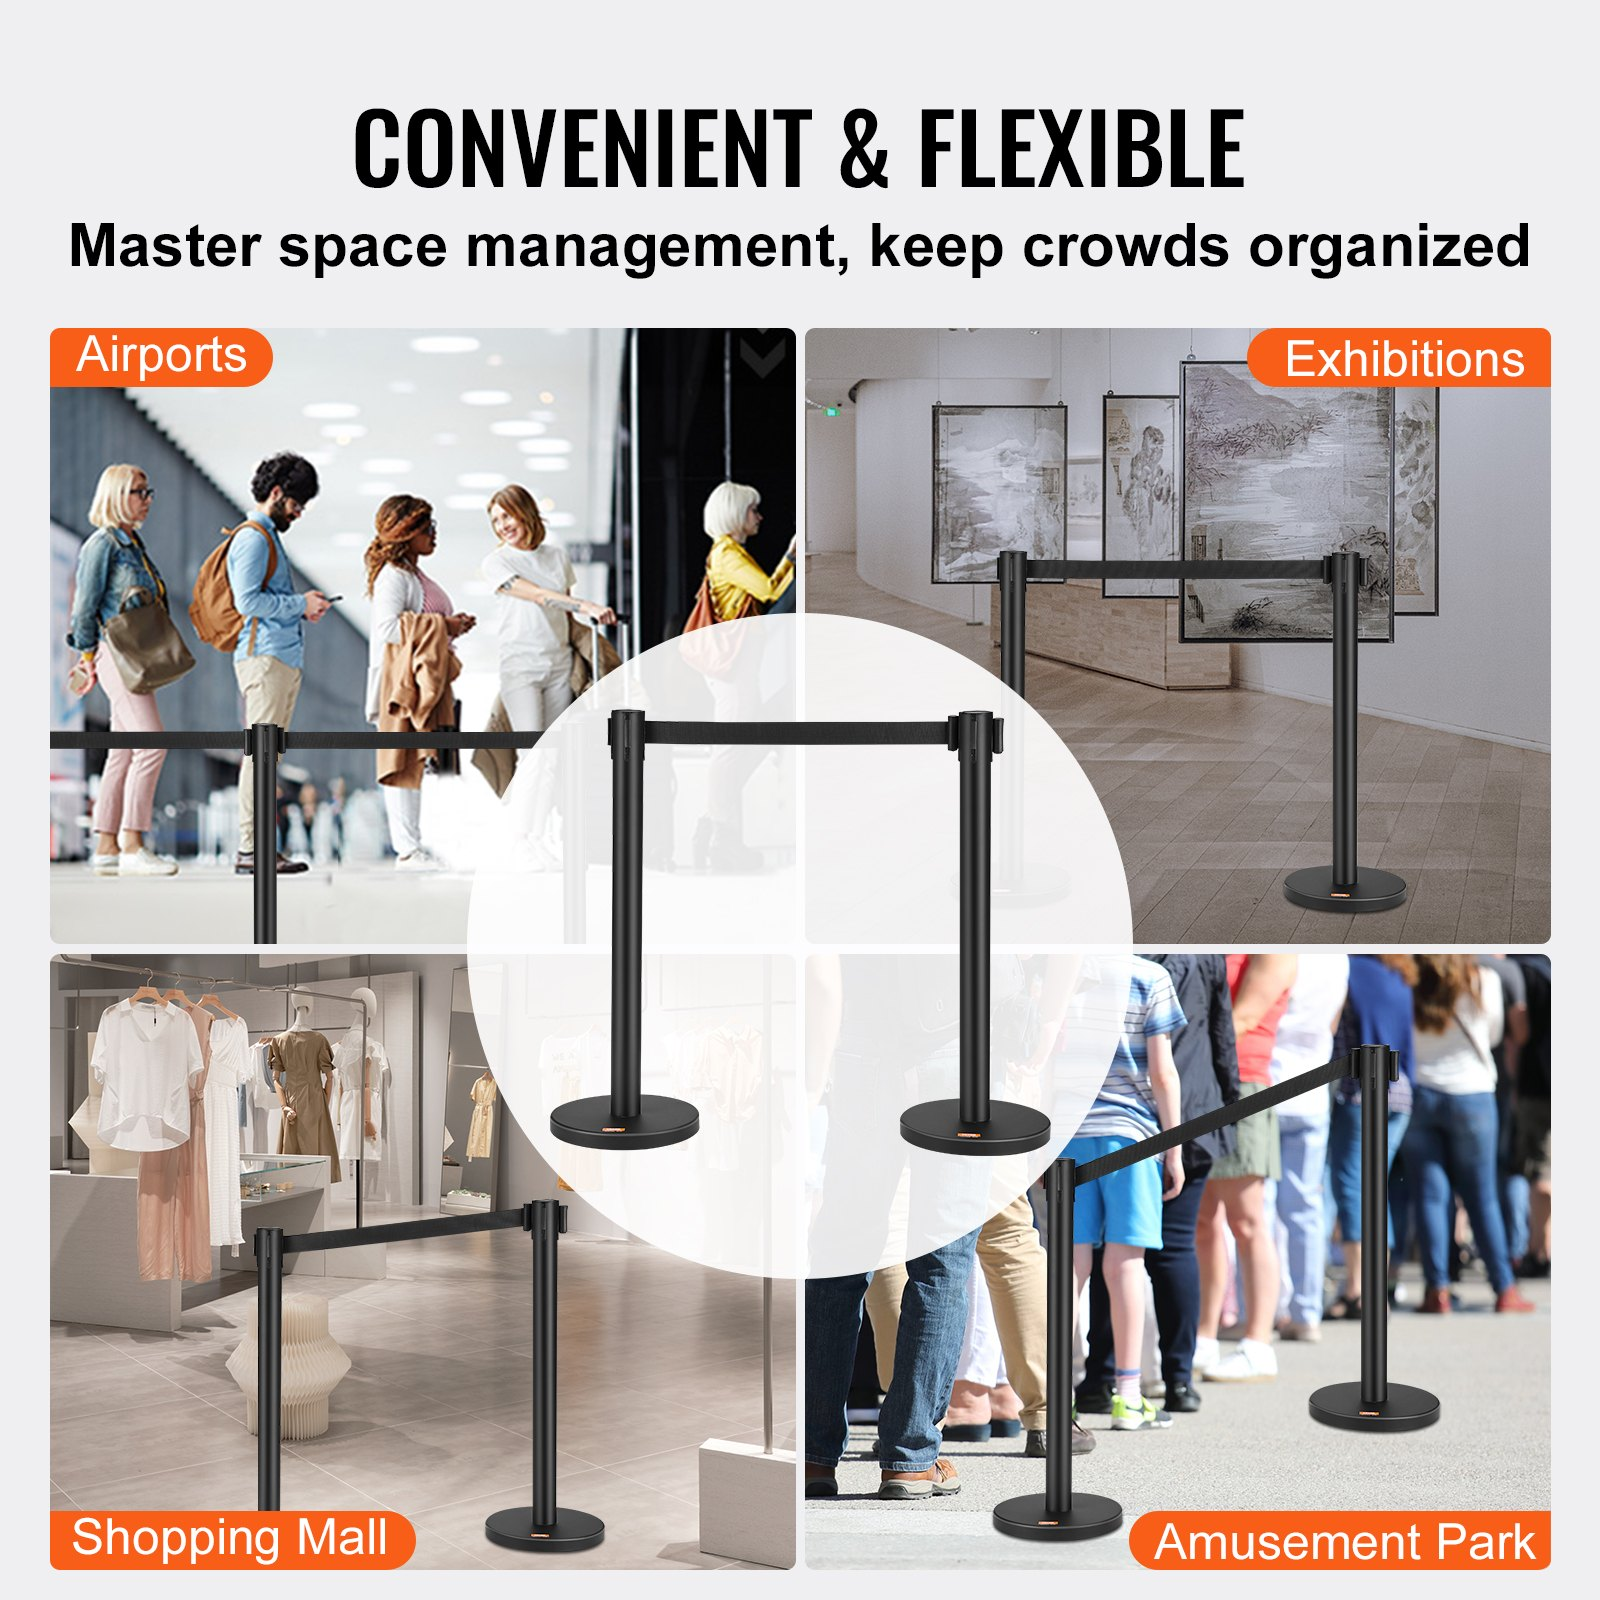 VEVOR Crowd Control Stanchions, 2-Pack Crowd Control Barriers, Carbon Steel Baking Painted Stanchion Queue Post with 6.5FT Black Retractable Belt, Belt Barriers Line Divider for Exhibition, Airport, Goodies N Stuff